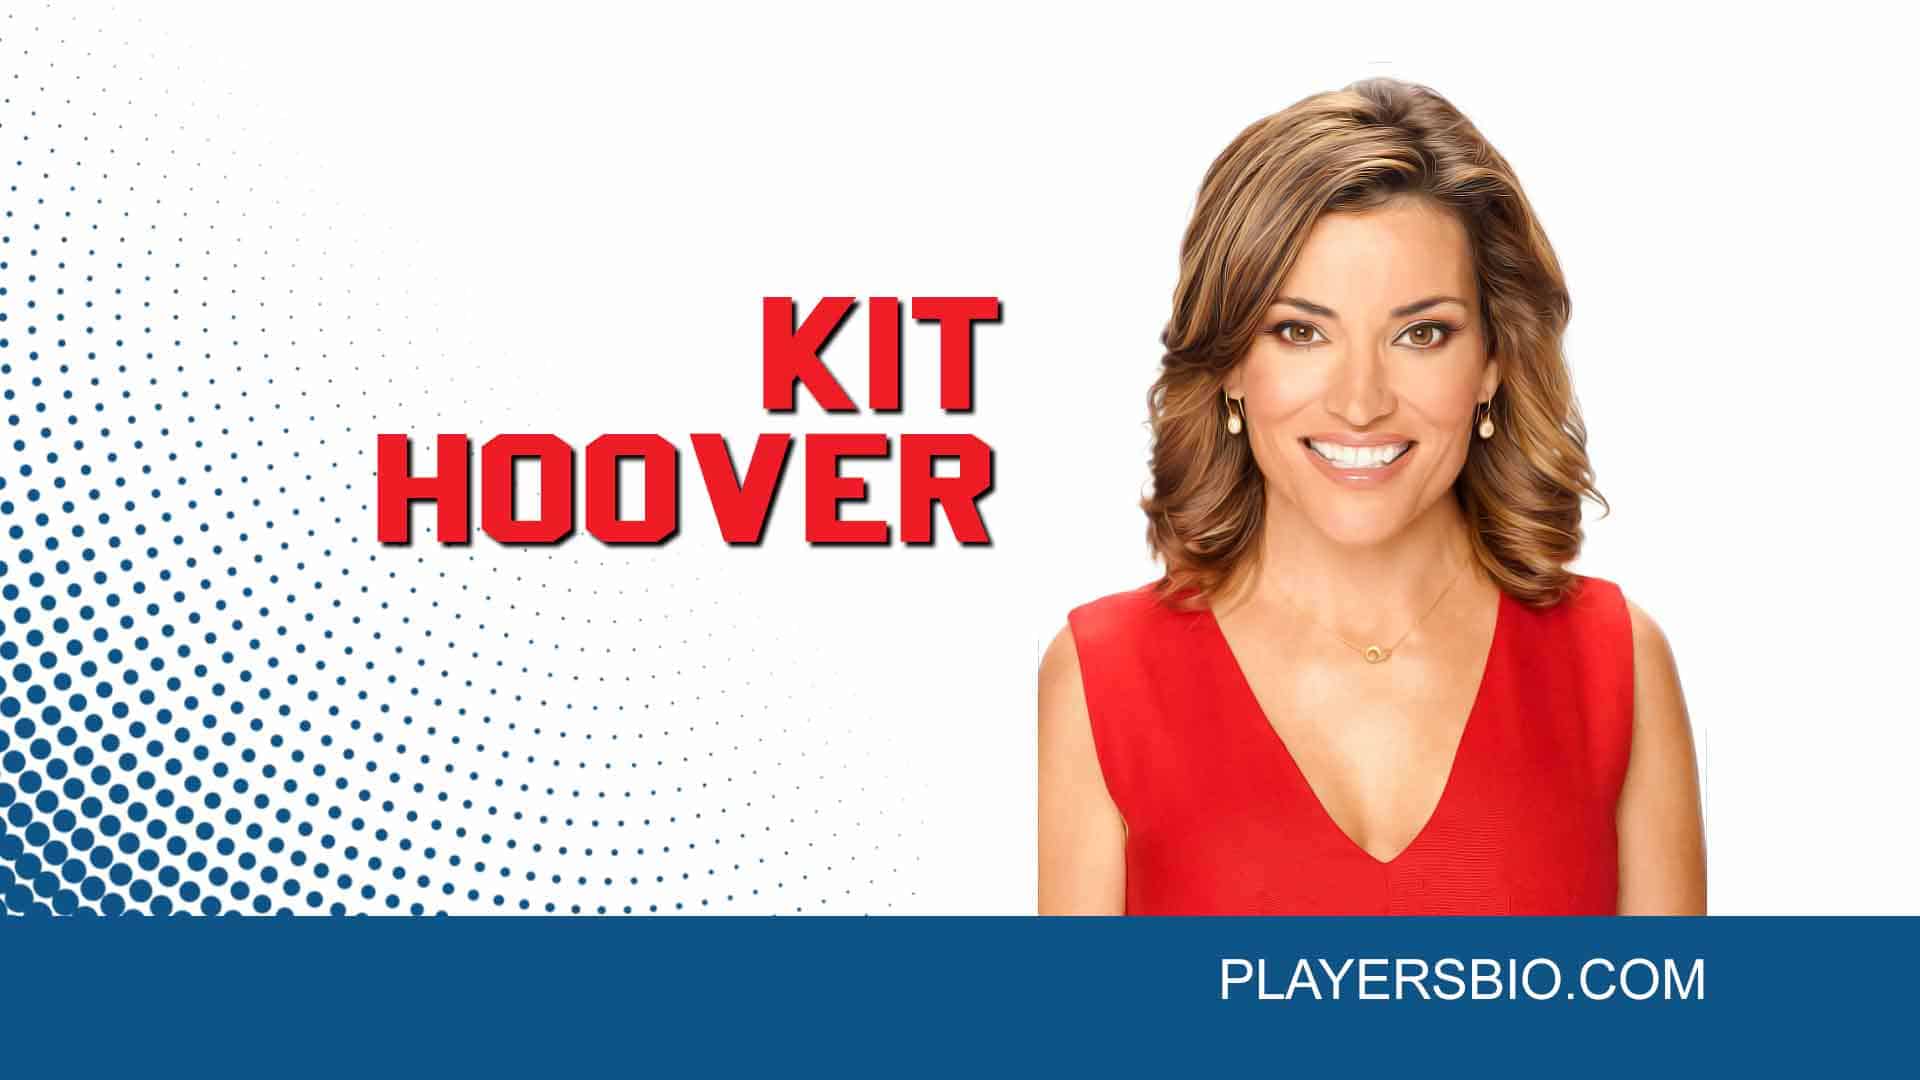 Kit Hoover is an American Journalist who has formerly worked for ESPN. 